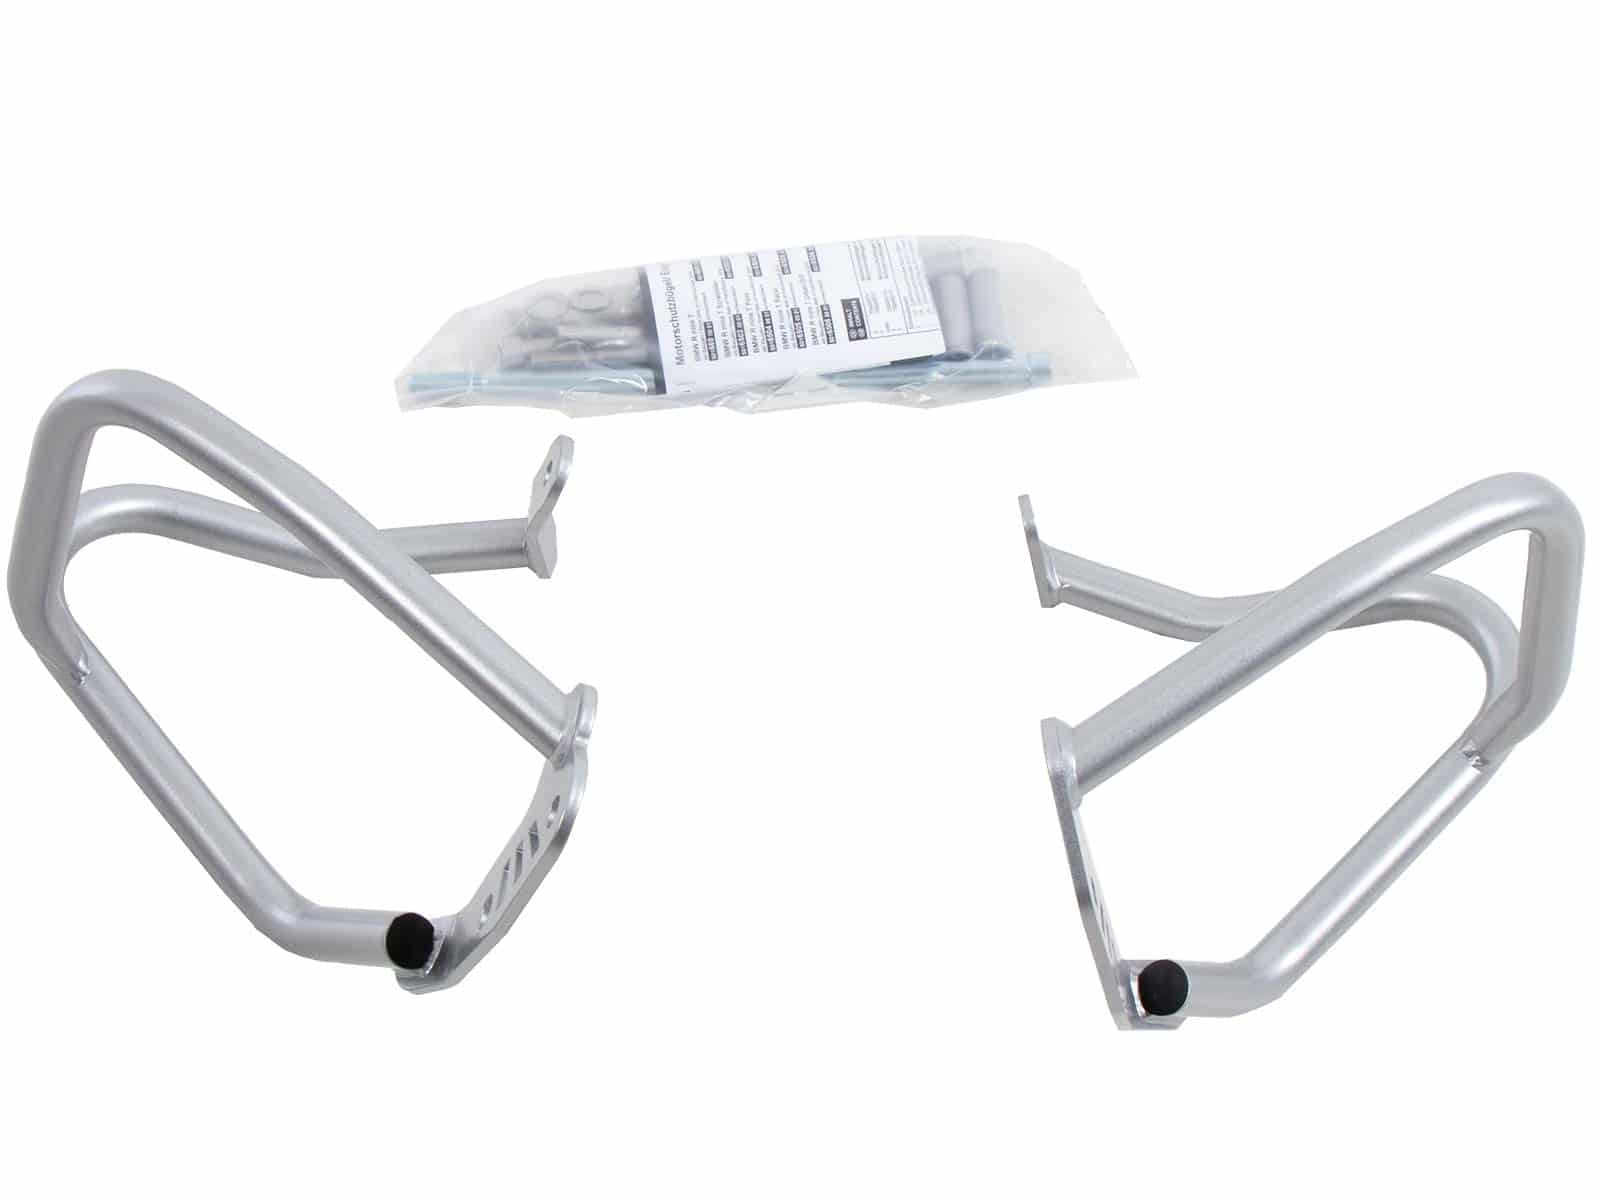 Engine protection bar silver for BMW R nineT (2014-)